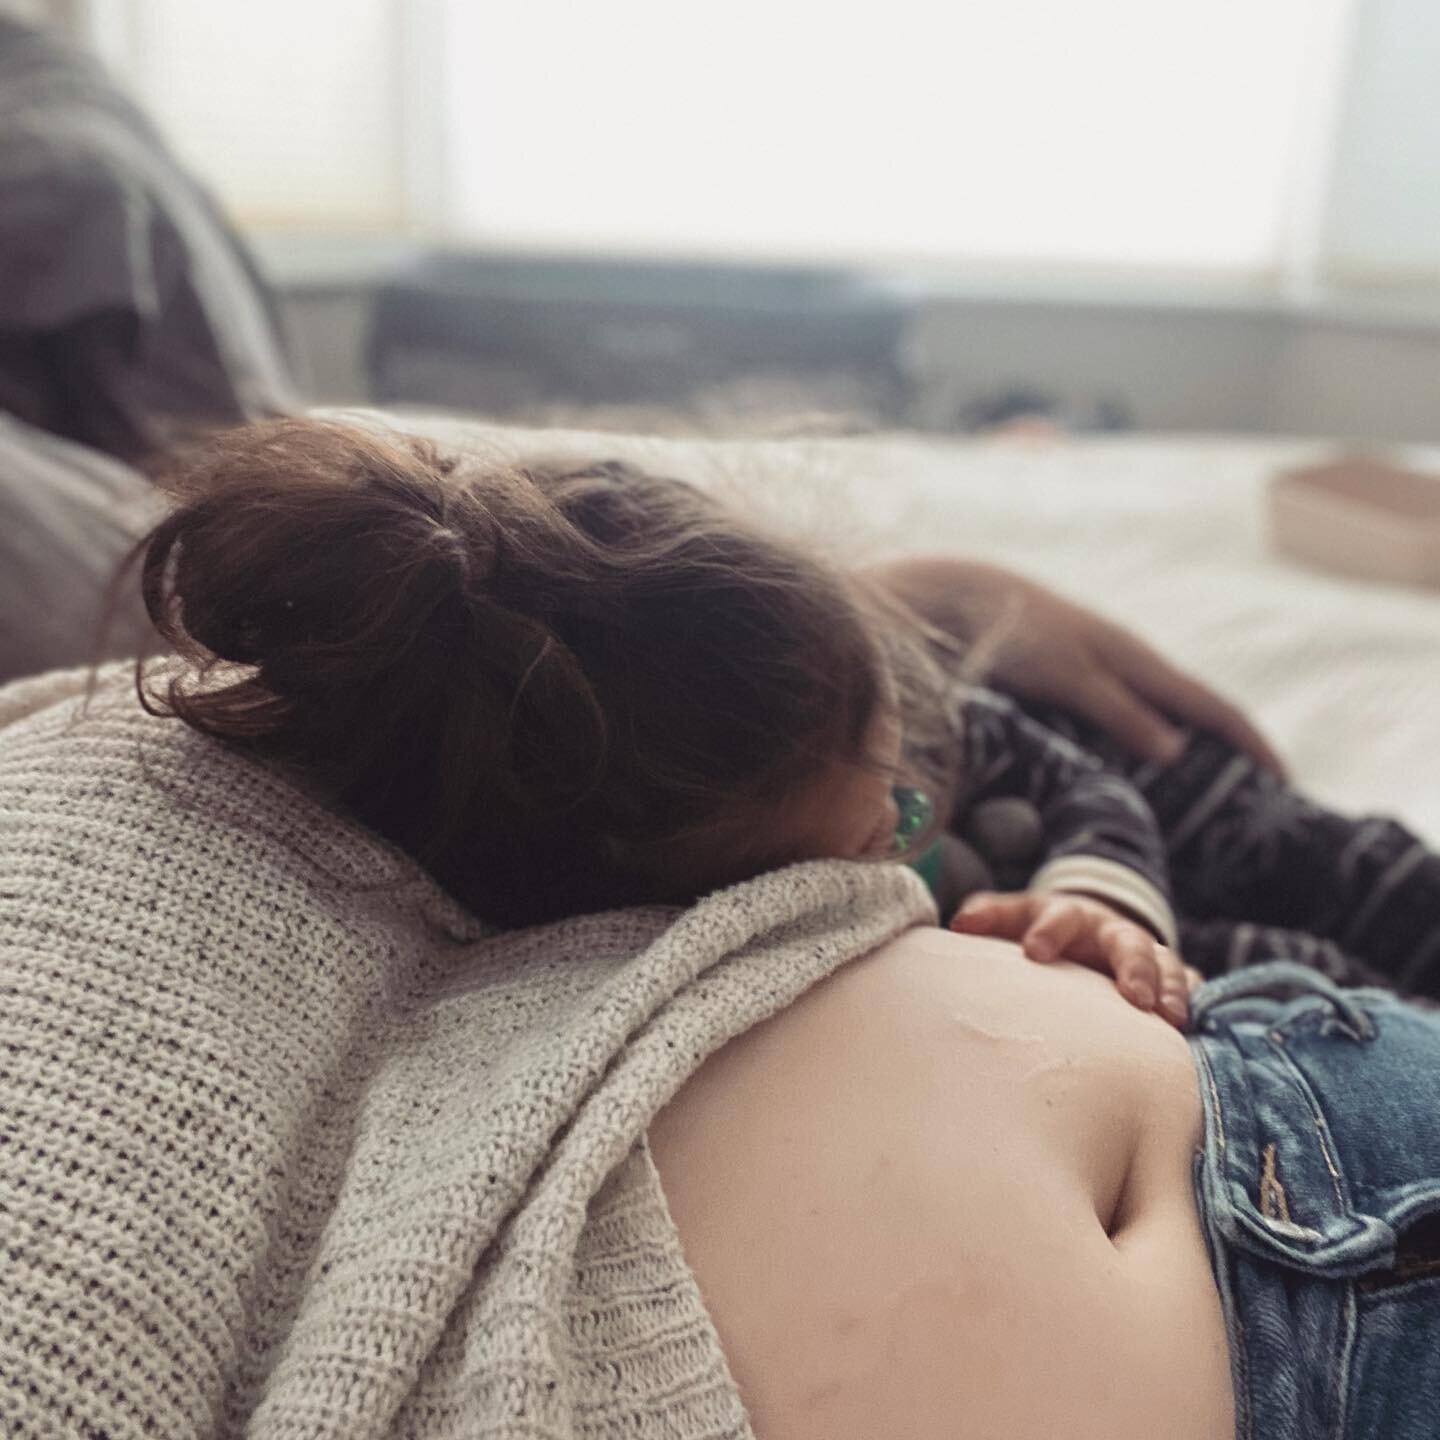 It&rsquo;s time to love your body. Every inch of it. Love your squishy belly and every single stretch mark that grew with each week you carried a new life inside of you. Their very first home, a place of  love, comfort, and safety. Deserving of only 